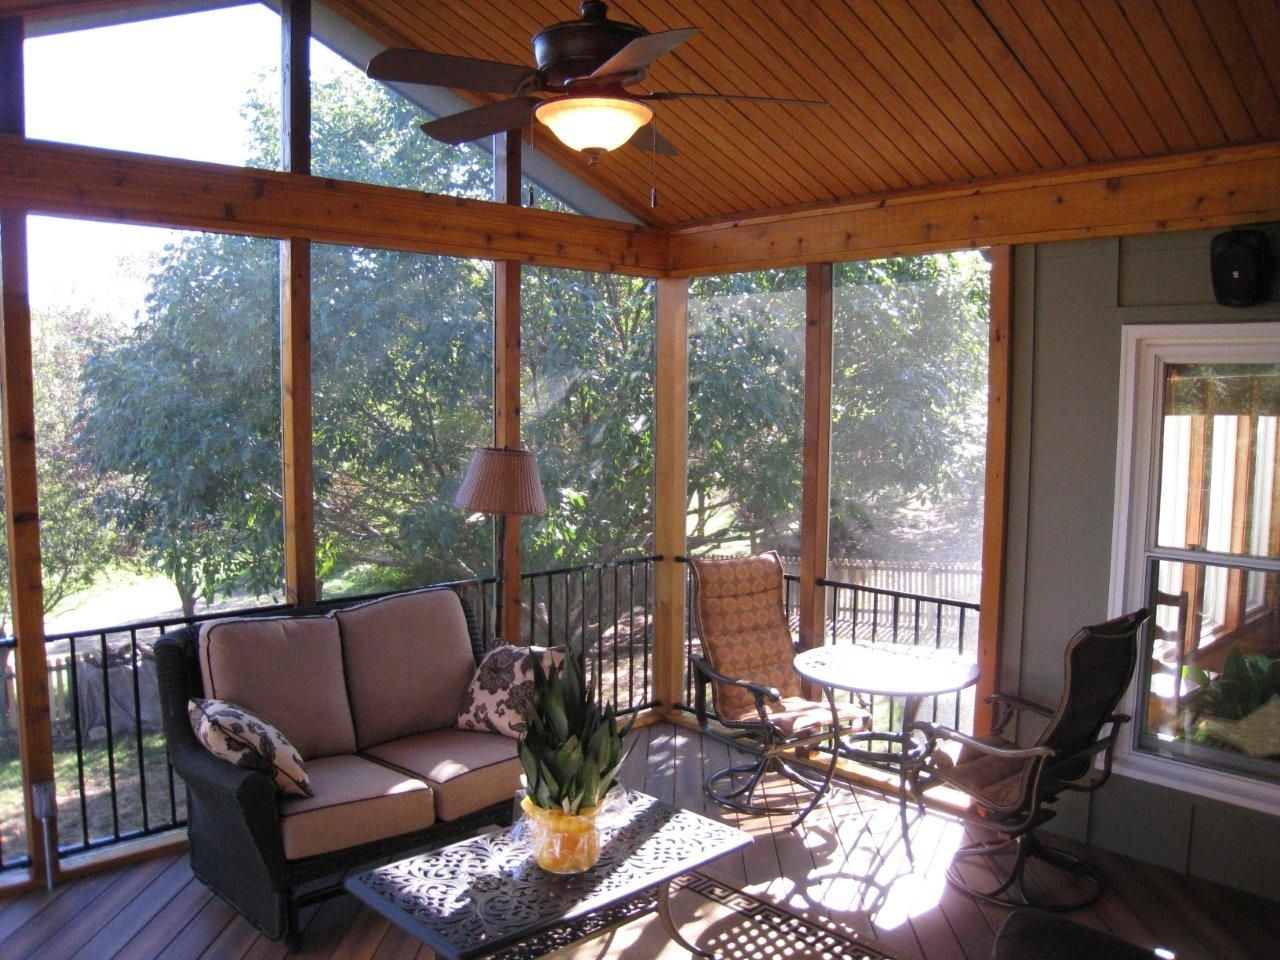 Outdoor Ceiling Fans For Porches Regarding Fashionable Low Profile Outdoor Ceiling Fans With Light In Farmhouse With (View 13 of 20)